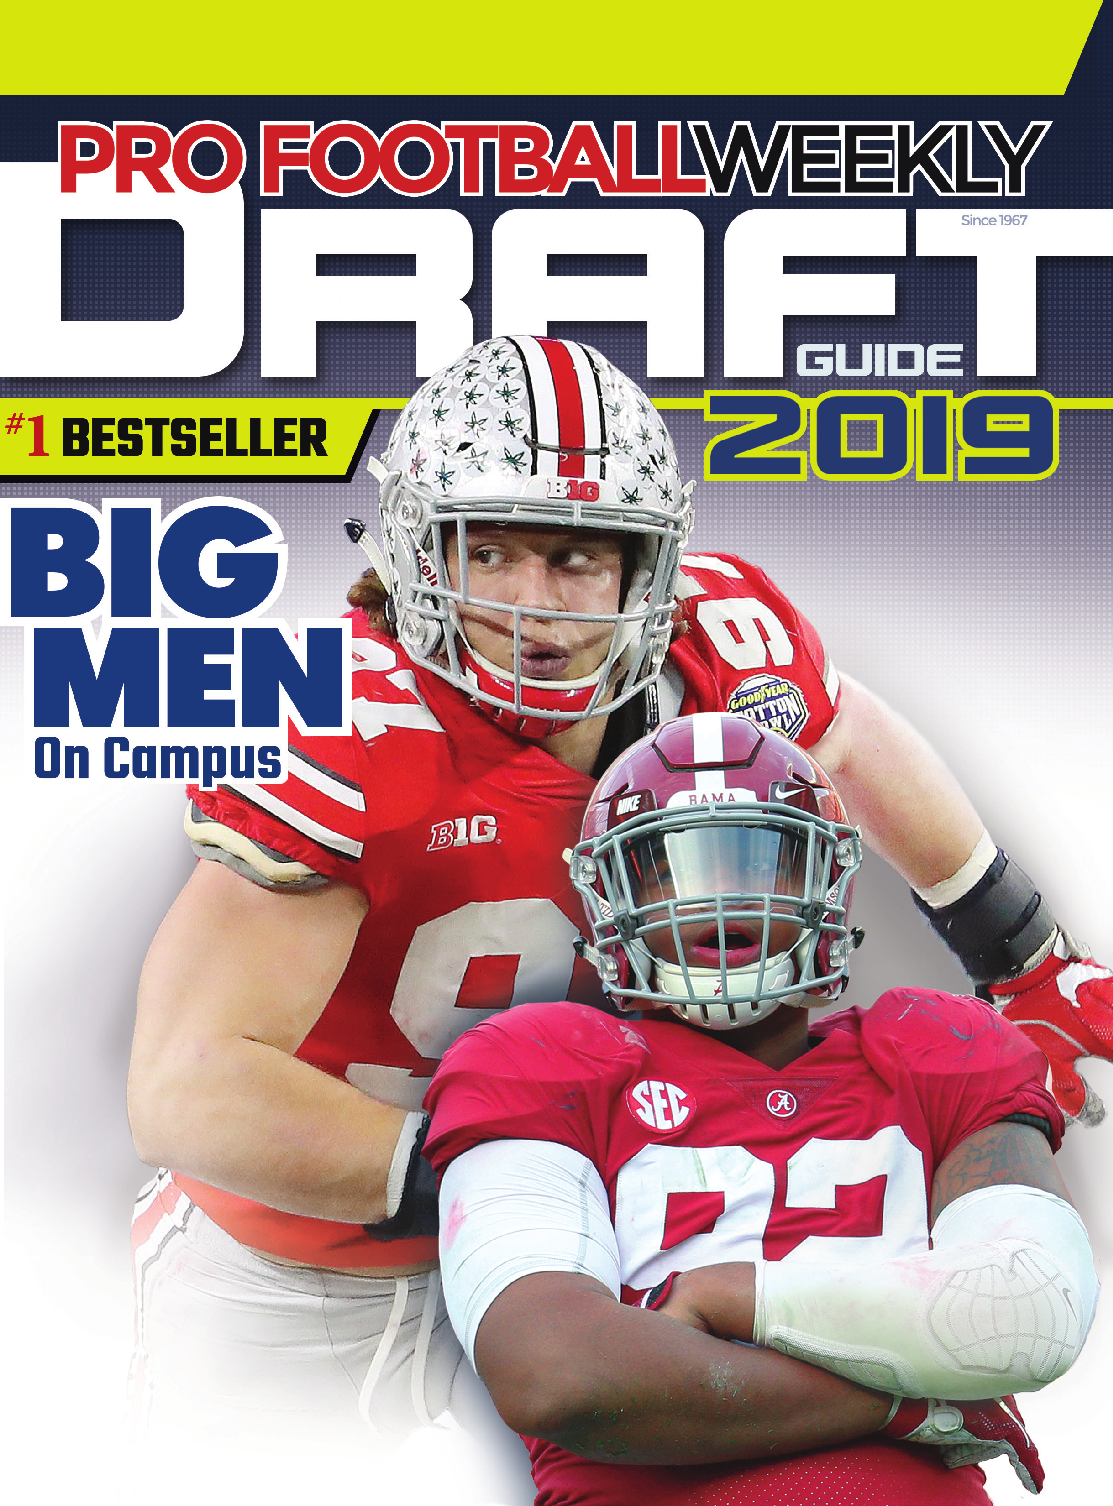 Pro Football Weekly Draft Guide 2019 - photo 1